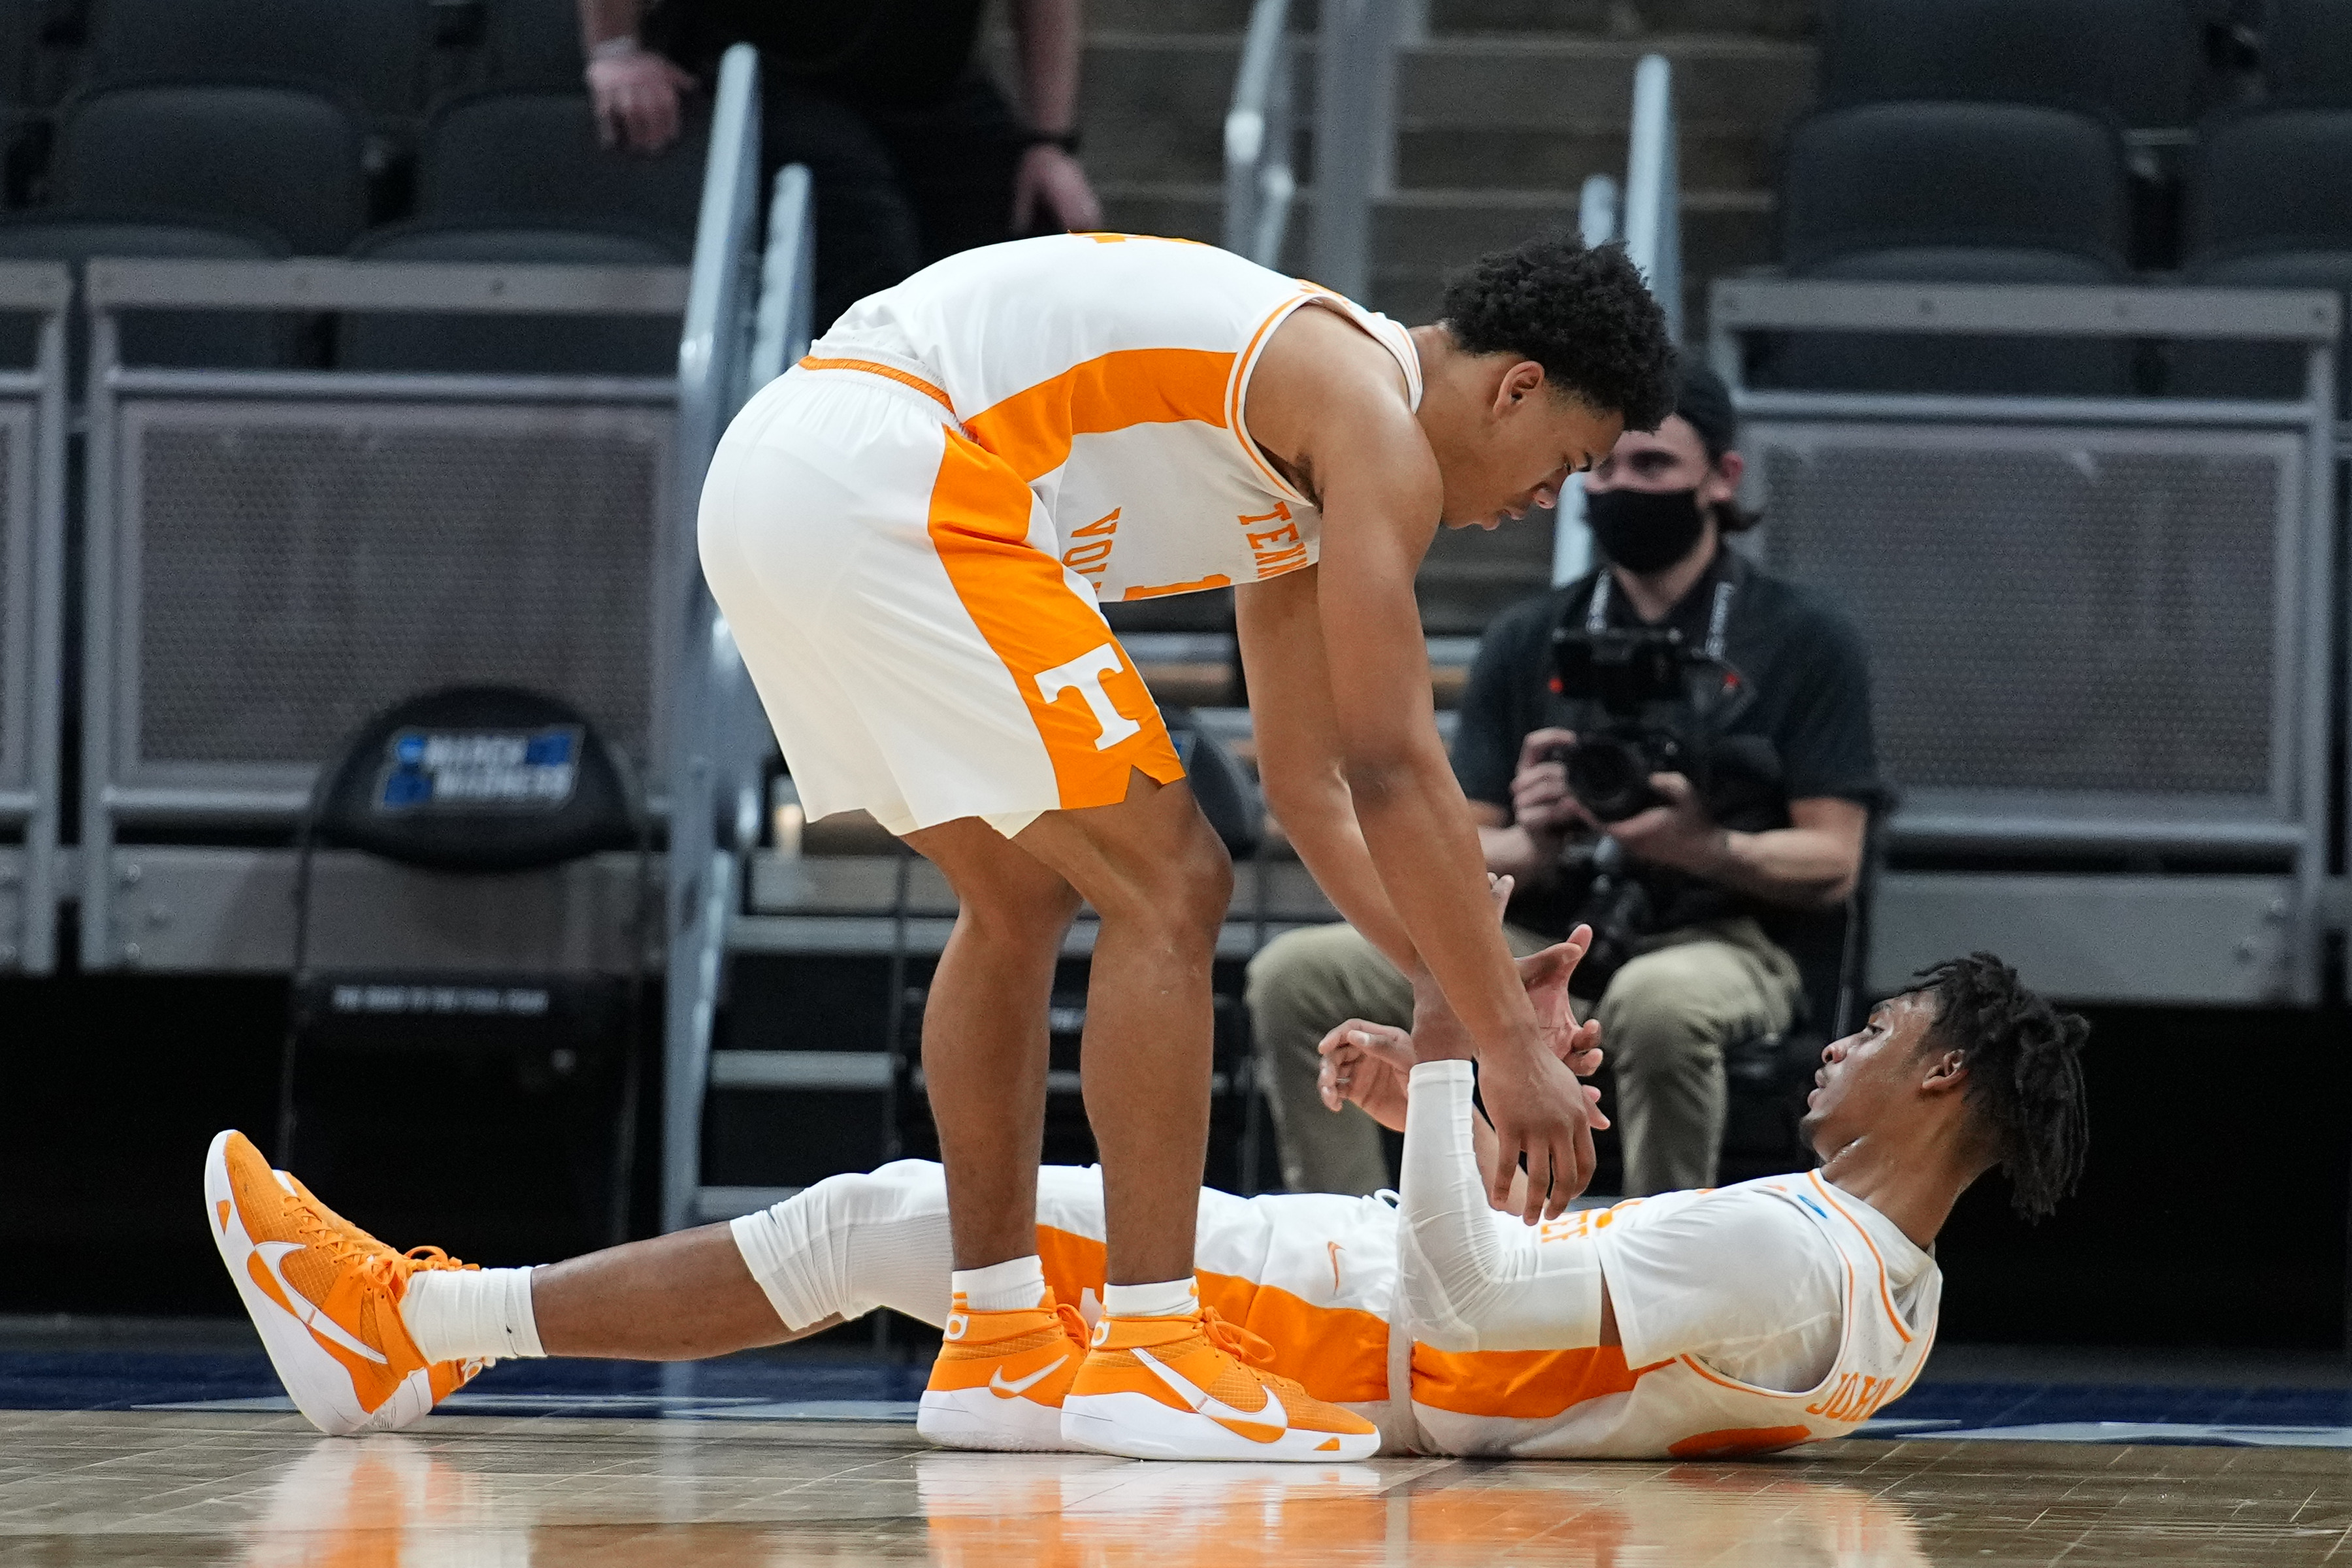 PHOTO GALLERY: Tennessee vs. Oregon St in NCAA Tournament